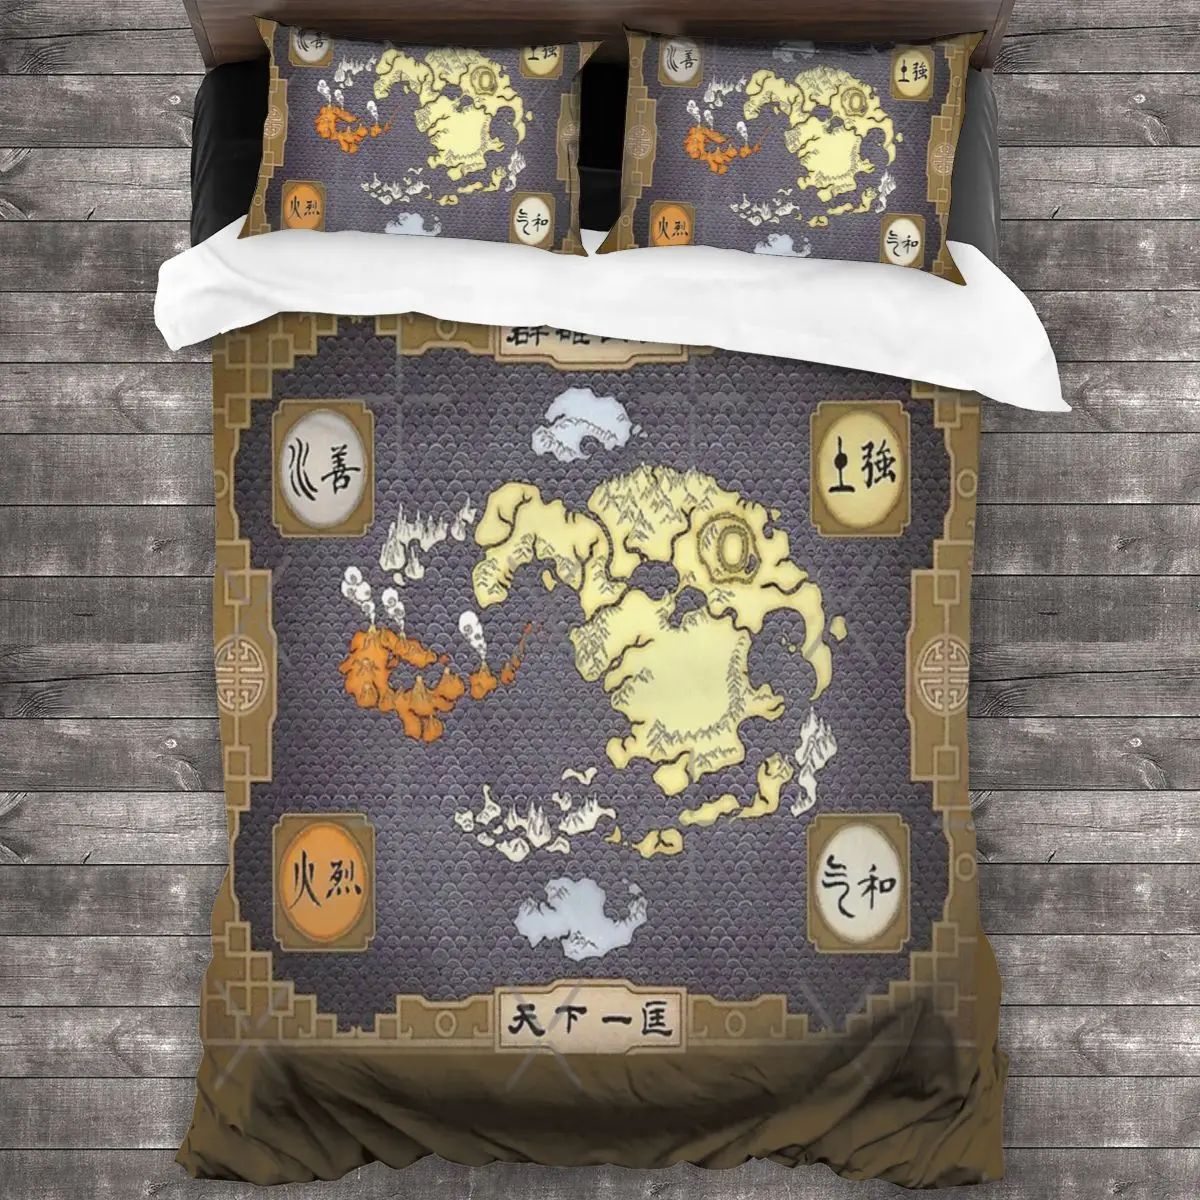 

Avatar The Last Airbender Map 1 Linens Bedspread Bedding Set Duvet Cover Bed Covers Duvet Covers Bed Linen 1 5 Sp